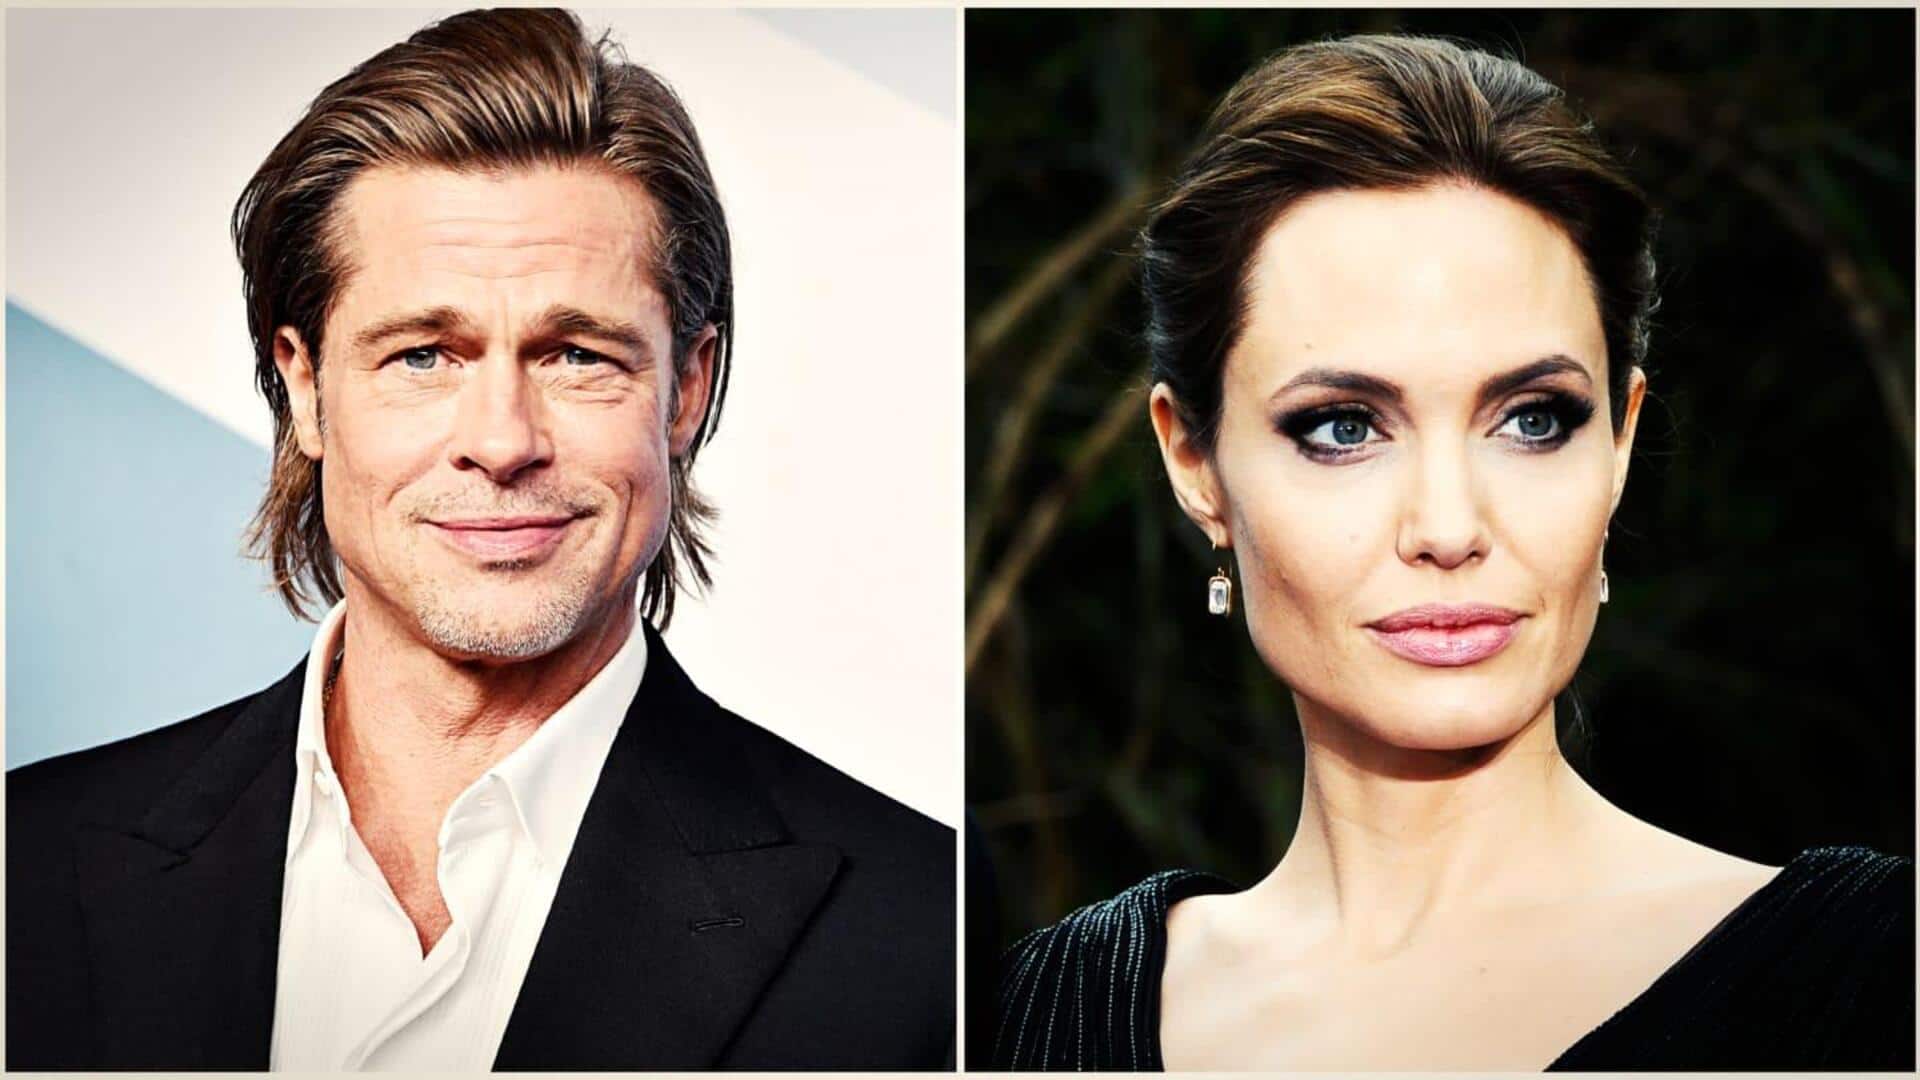 Brad Pitt prevails in dispute over $500M winery against Angelina